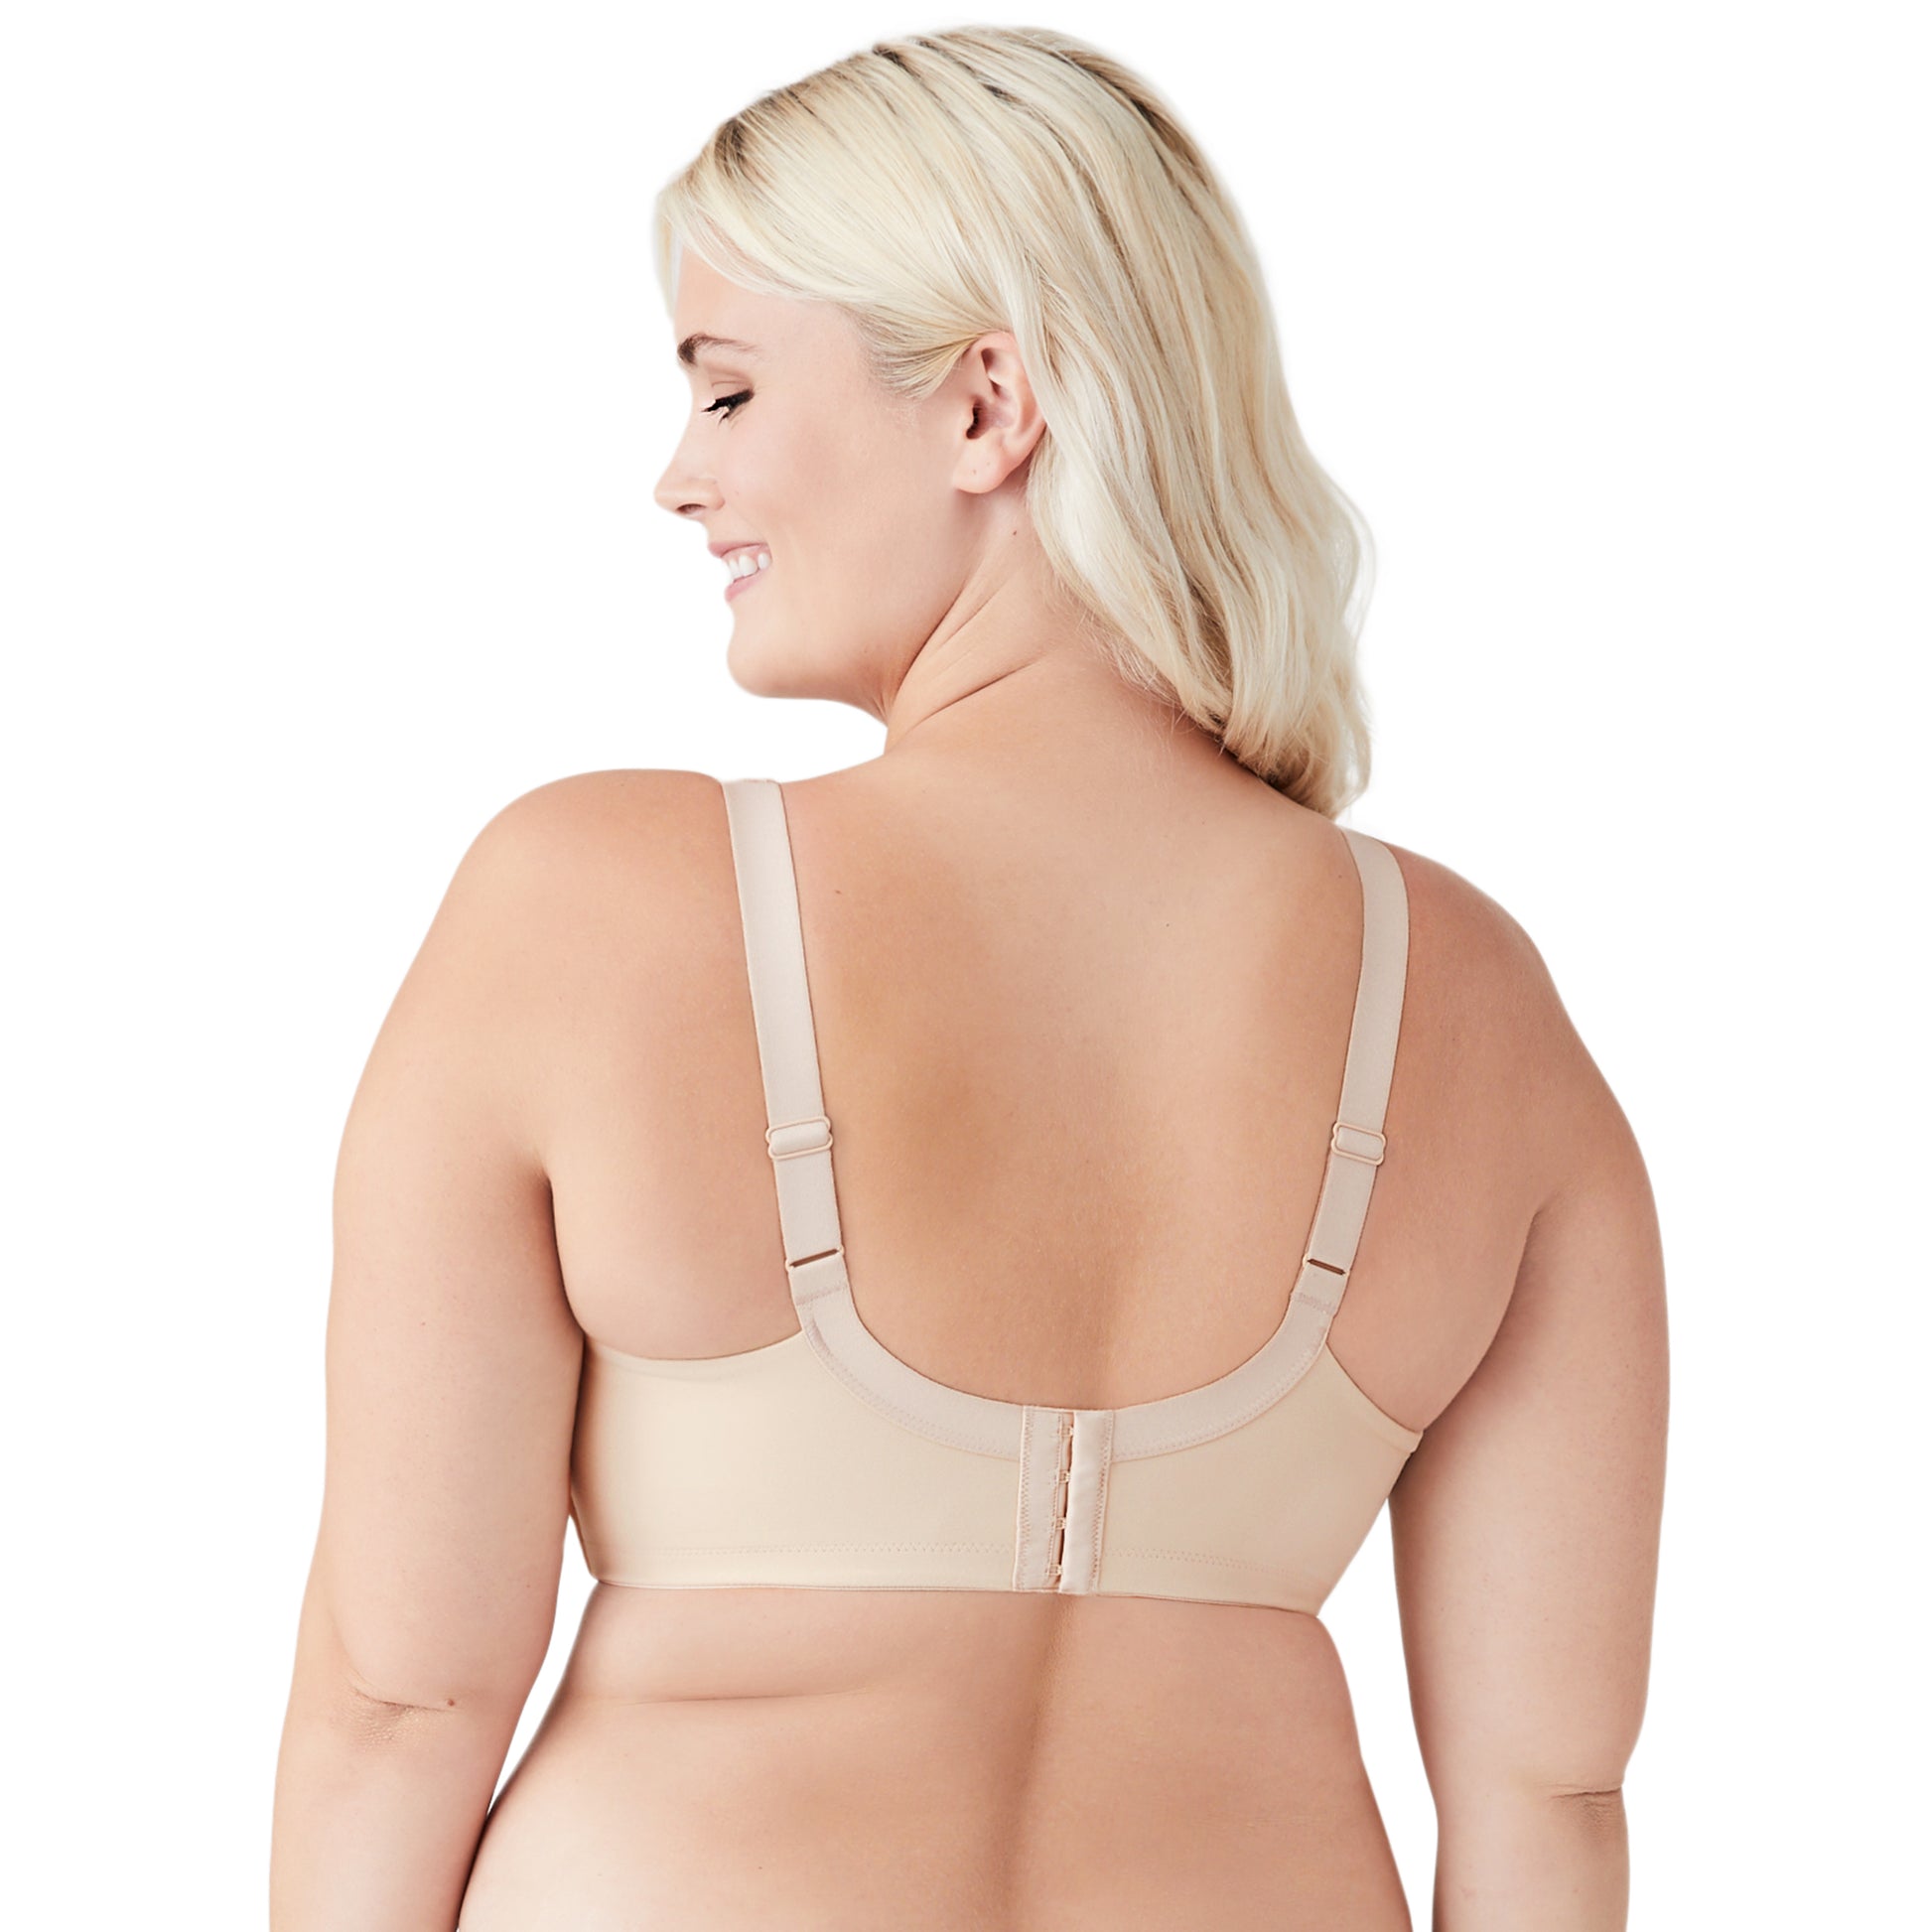 How Perfect Full Cup Wirefree Bra - 852389 SAND  Wacoal   